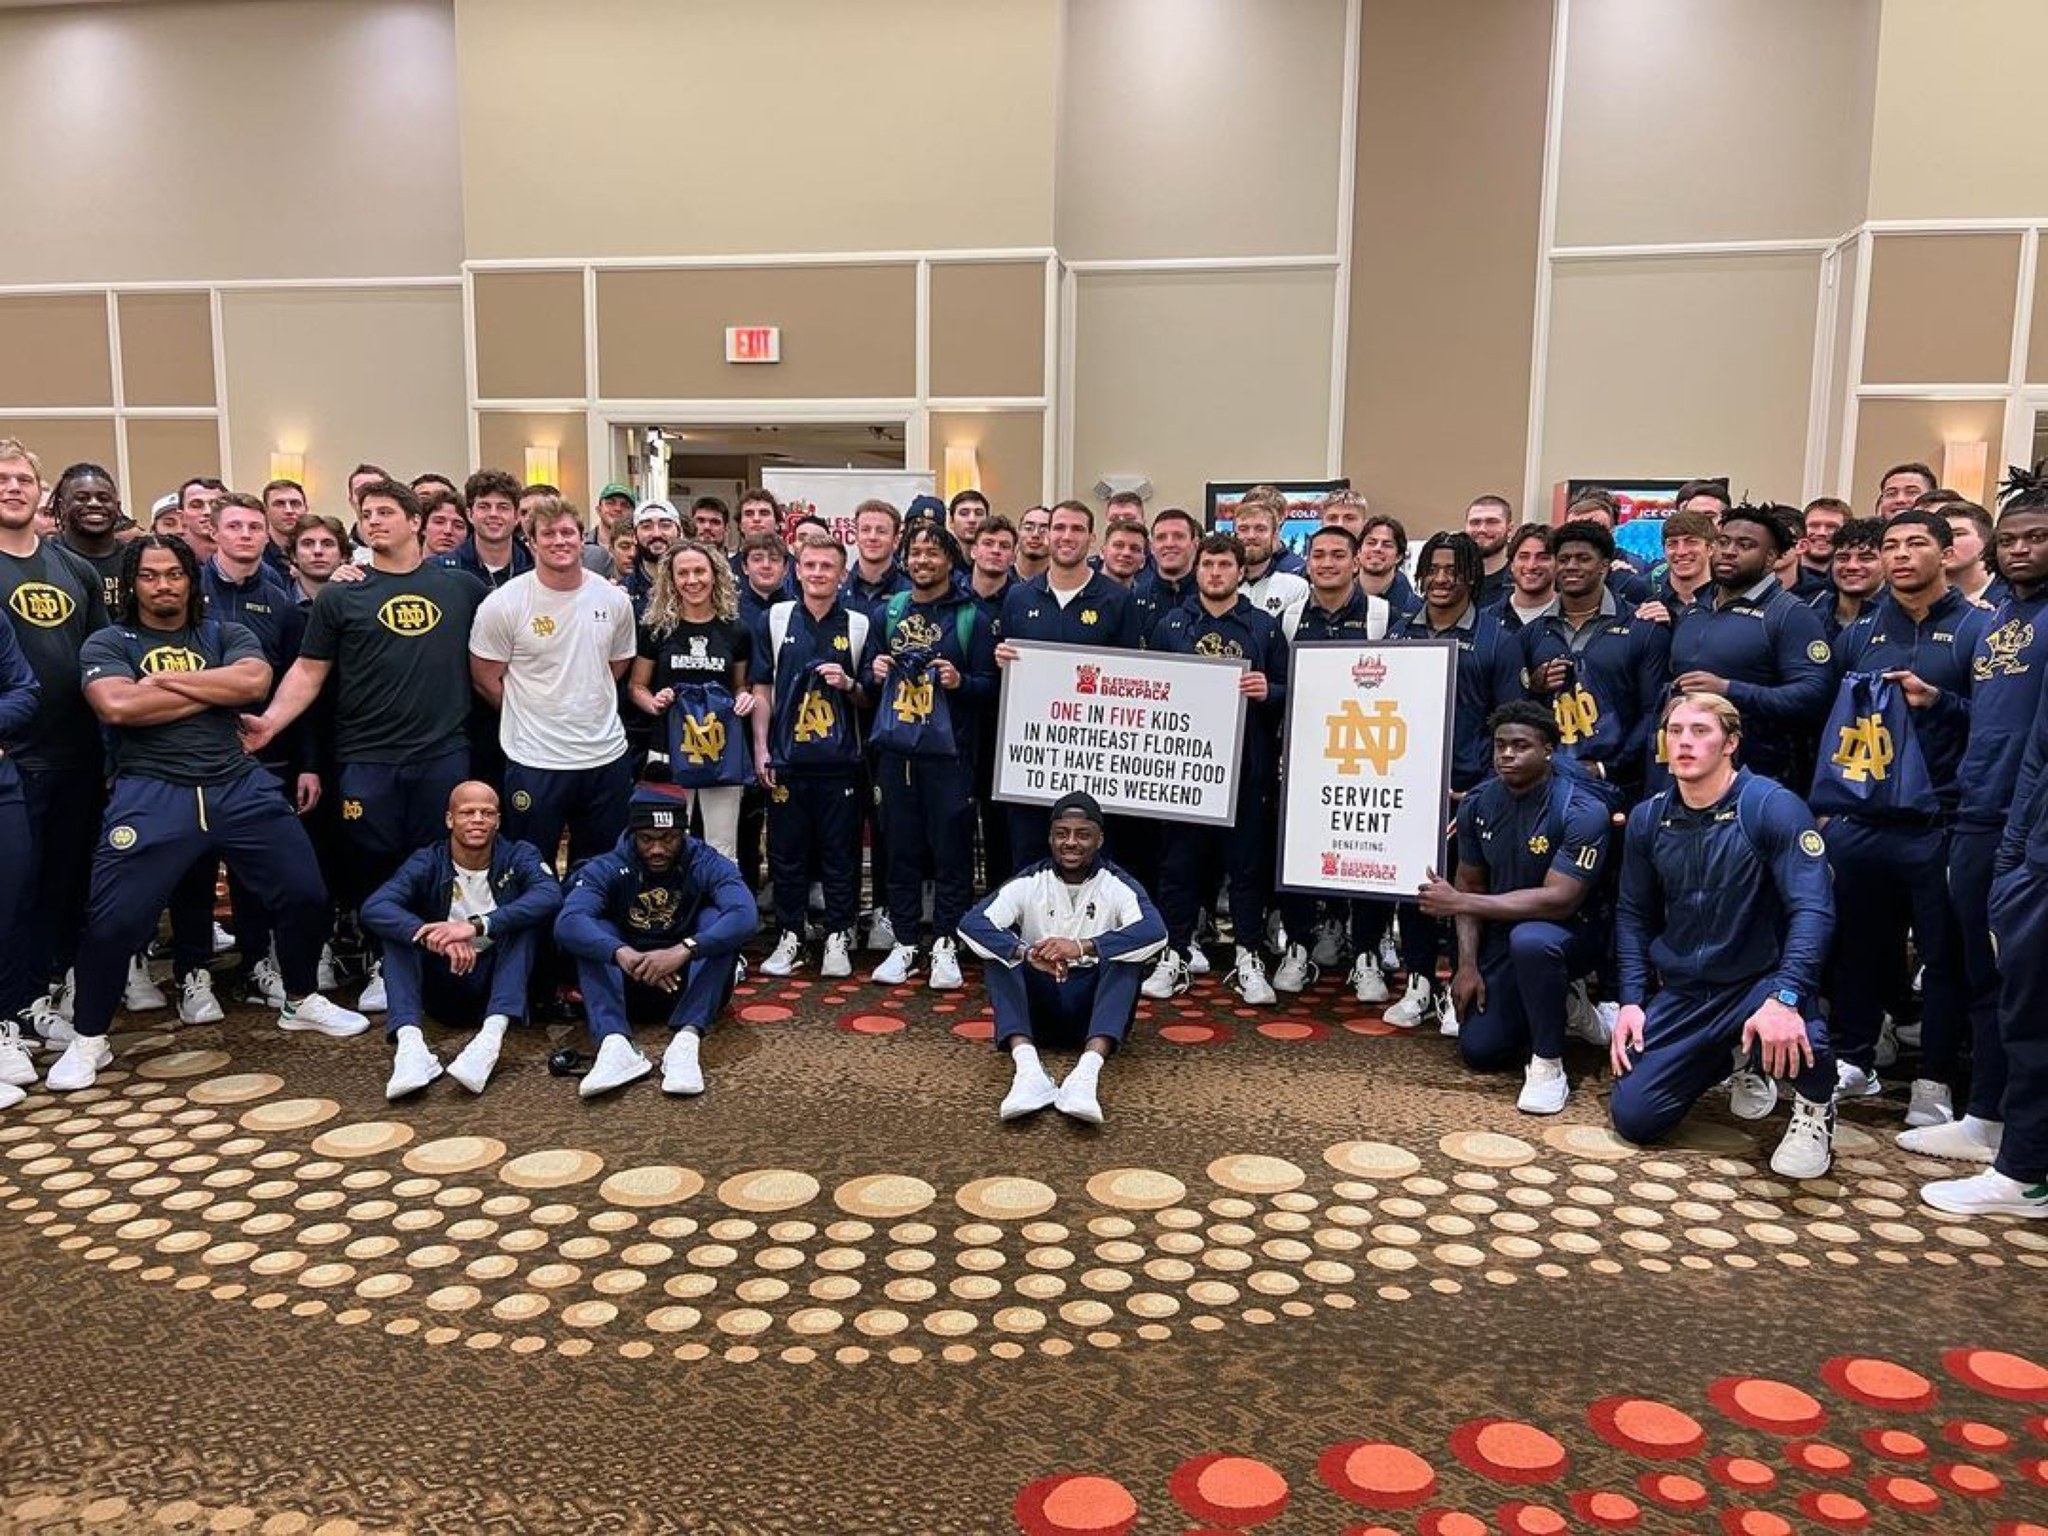 Notre Dame Players Fill Backpacks With Food for Children Ahead of Gator Bowl